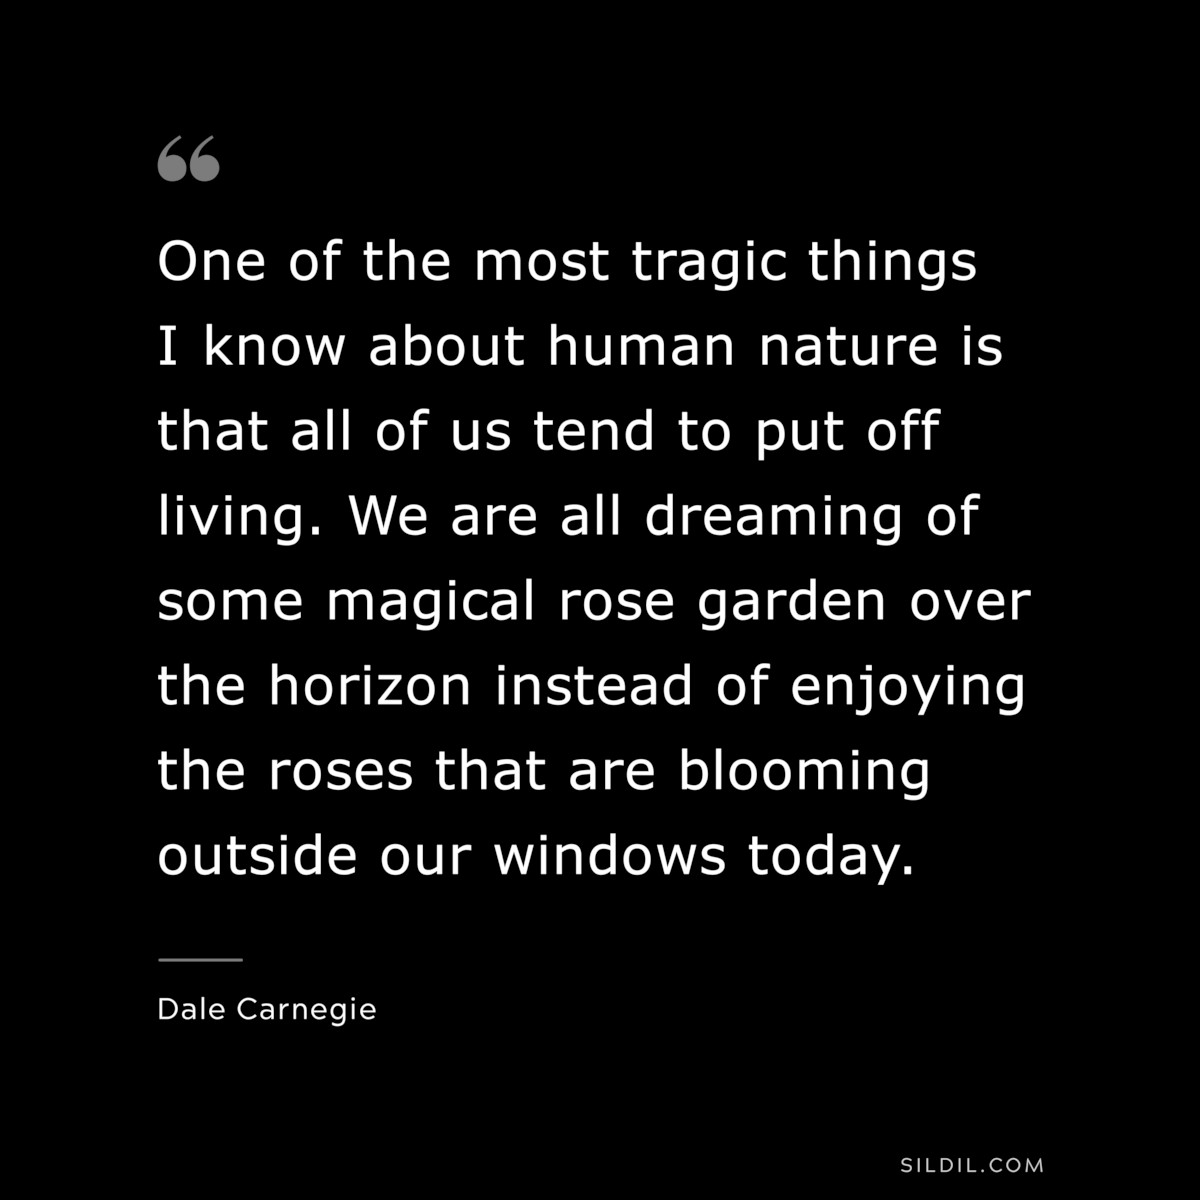 One of the most tragic things I know about human nature is that all of us tend to put off living. We are all dreaming of some magical rose garden over the horizon instead of enjoying the roses that are blooming outside our windows today.― Dale Carnegie